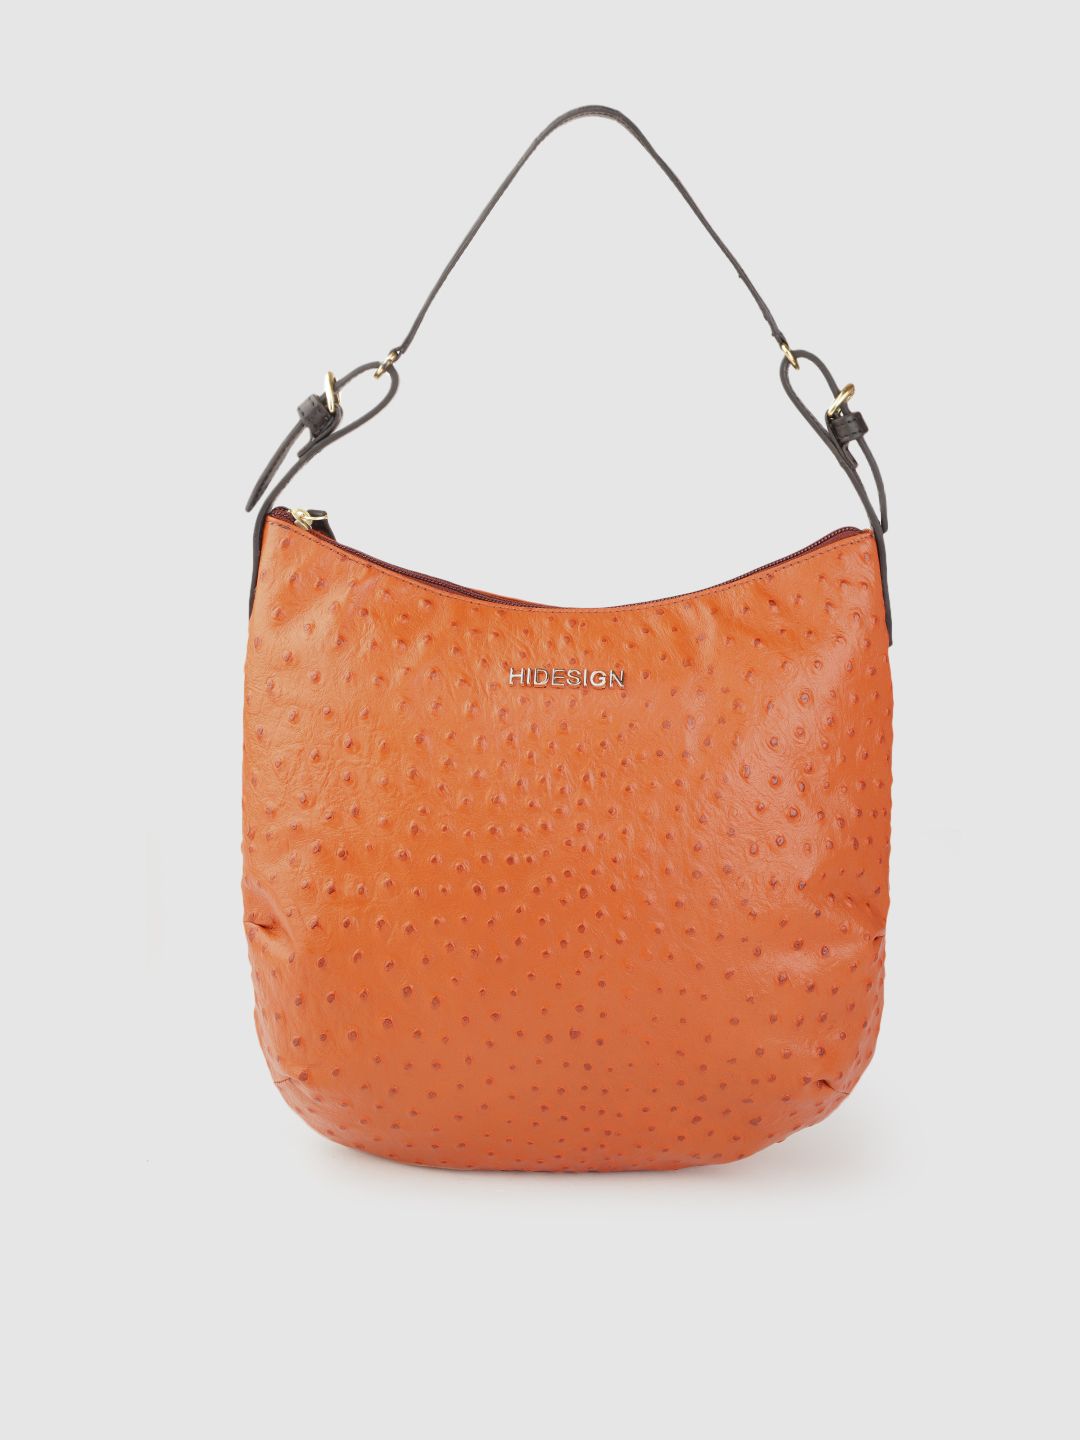 Hidesign Rust Orange Animal Textured Leather Hobo Bag with Pouch Price in India